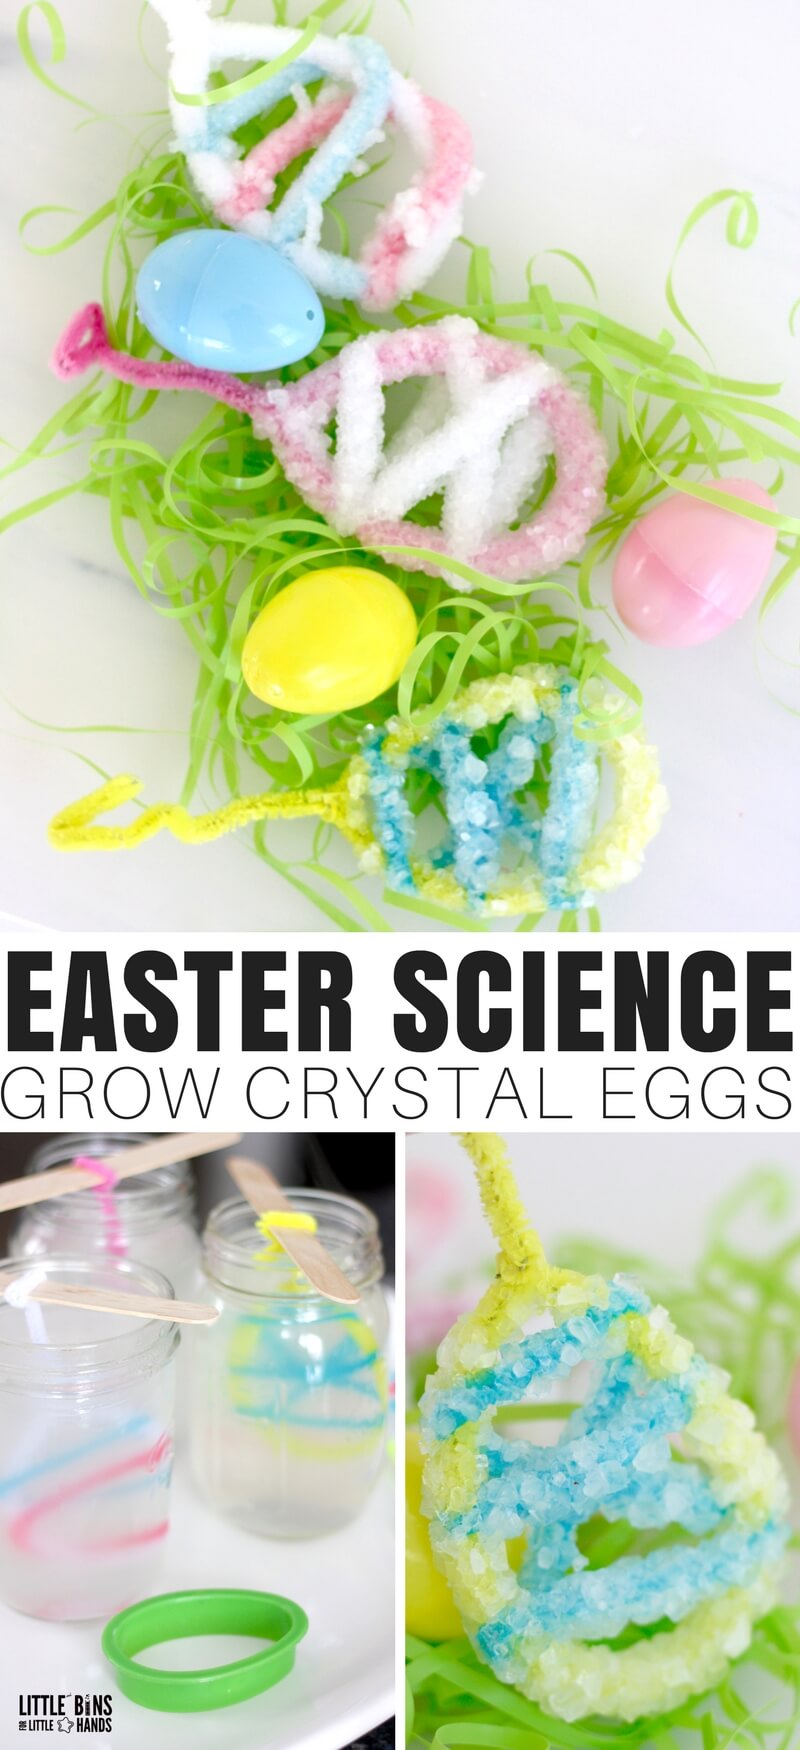 Growing these types of crystals is truly a classic science experiment to try with kids and we have been trying to create a fun theme for each holiday and season! With Easter fast approaching, We decided this season to make crystal Easter eggs with our simple crystal Easter science experiment. Holiday theme science and STEM is the best.